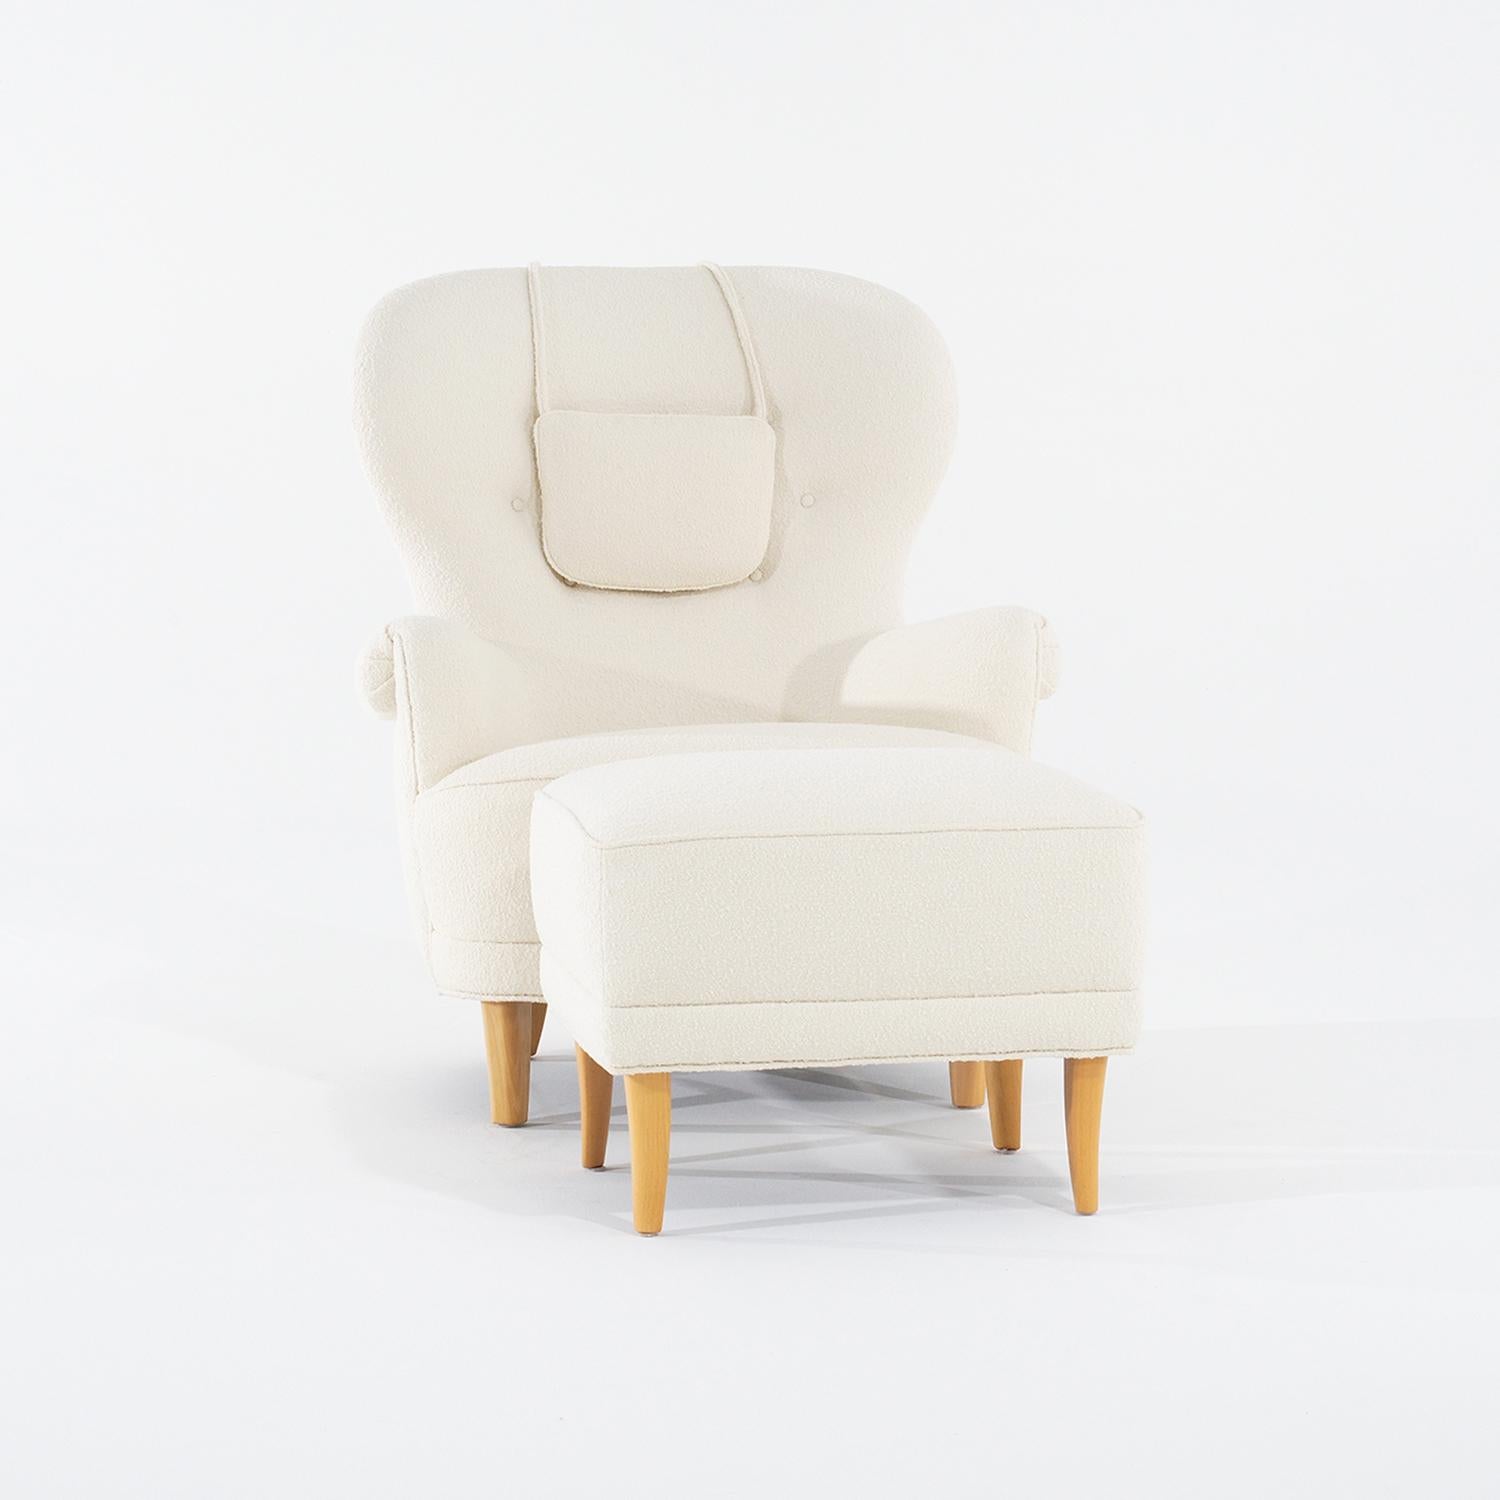 A vintage Mid-Century modern Swedish set of a lounge chair and footstool, designed by Carl Malmsten and produced by O.H. Sjögren in good condition. The large Scandinavian reading chair is composed with a headrest, the seat backrest is slightly